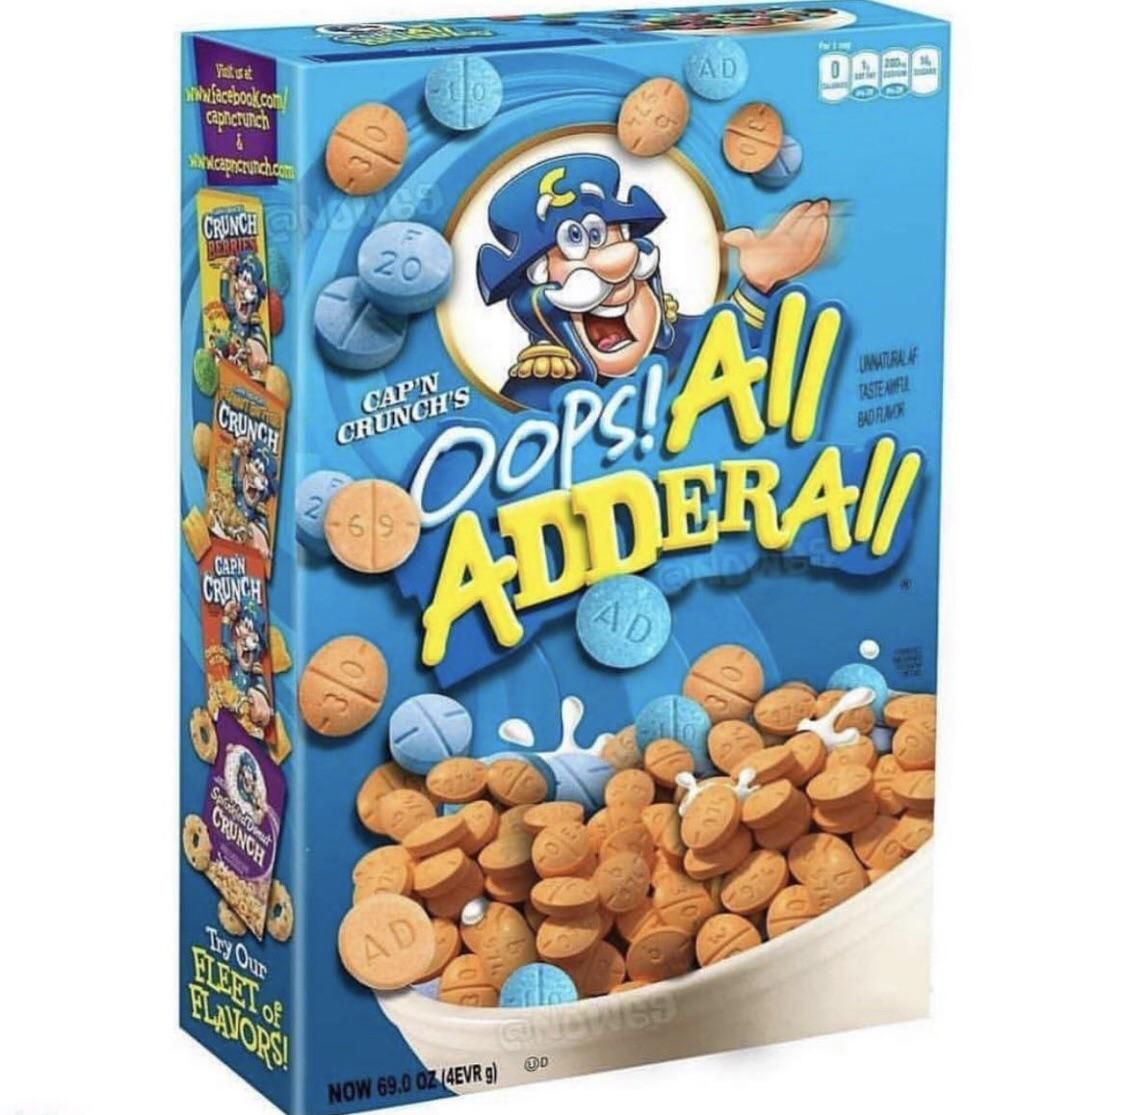 I loved these as a kid